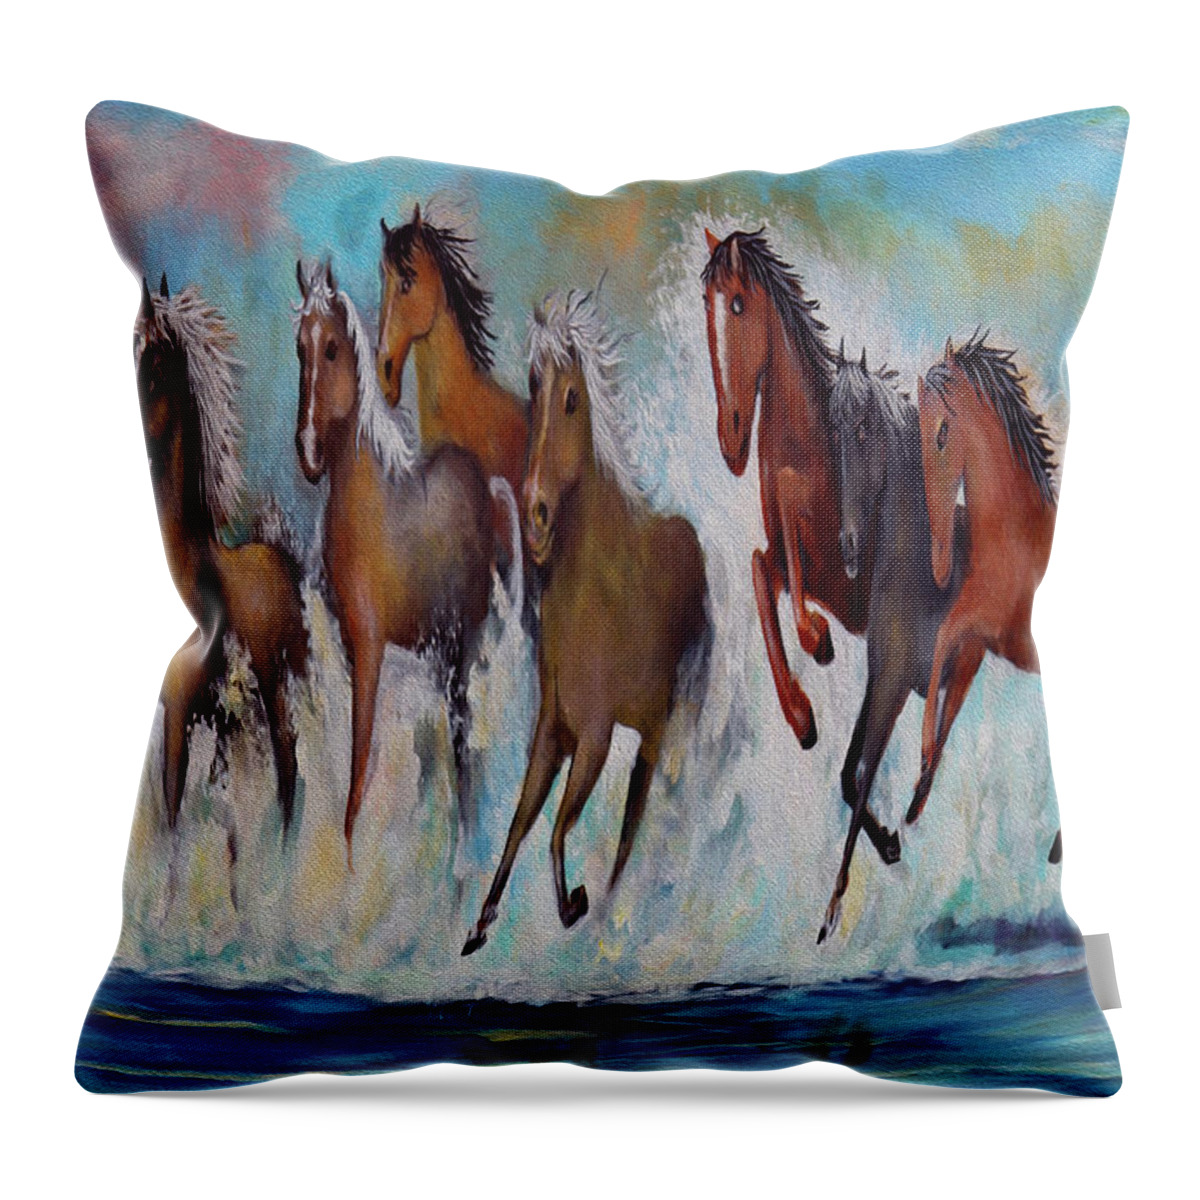  Splashing Surf Throw Pillow featuring the painting Horses Of Success by Virginia Bond